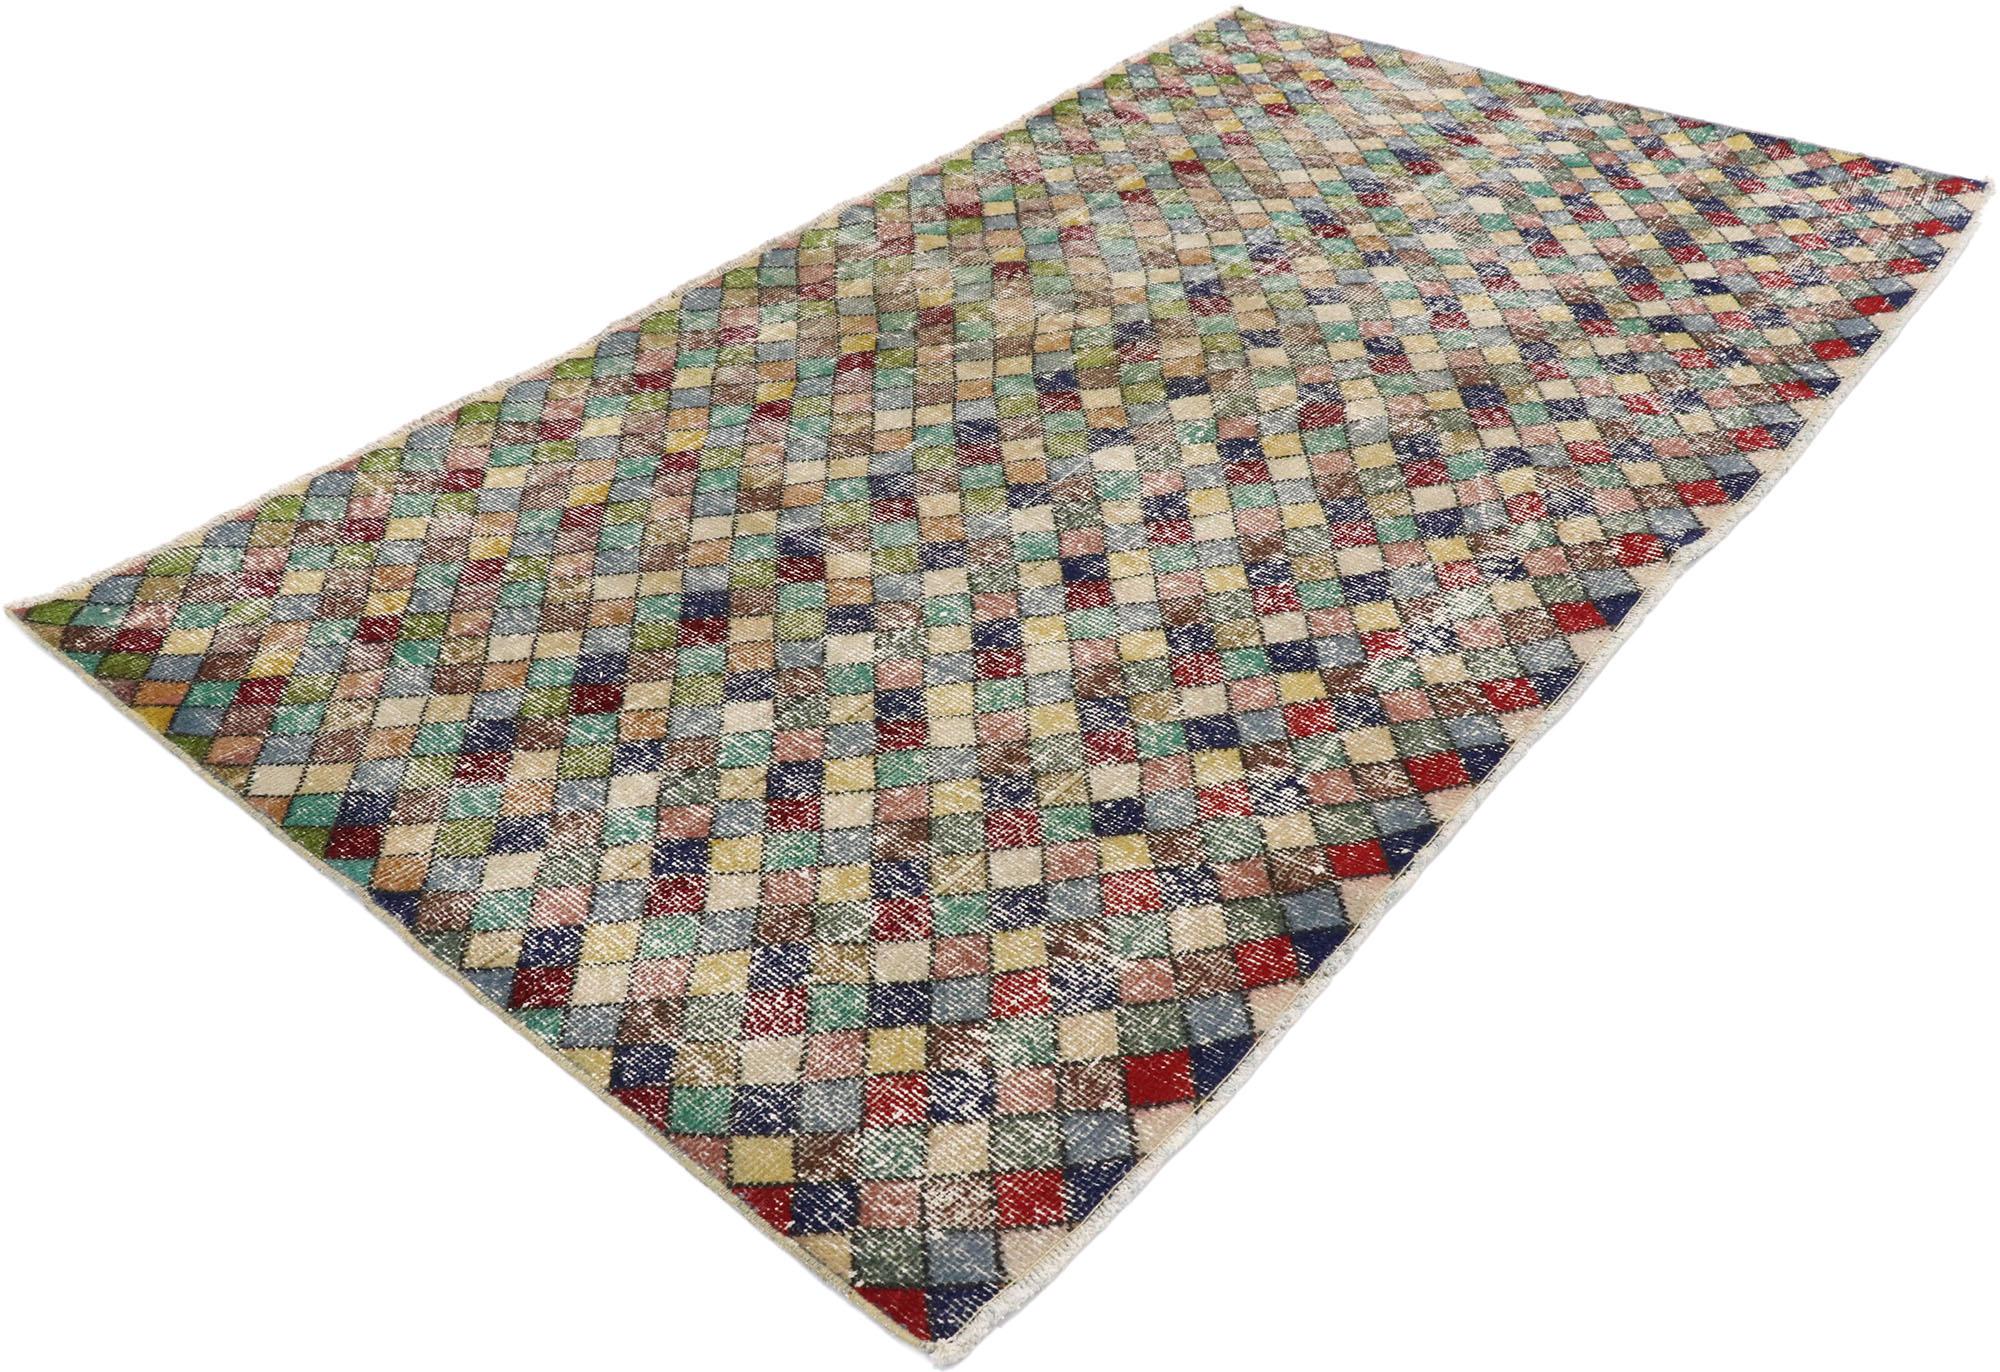 53282 distressed vintage Turkish Sivas rug with Rustic Mid-Century Modern style. This hand knotted wool distressed vintage Turkish Sivas rug features an all-over checkerboard pattern comprised of multicolored diamonds. Gentle waves of abrash and